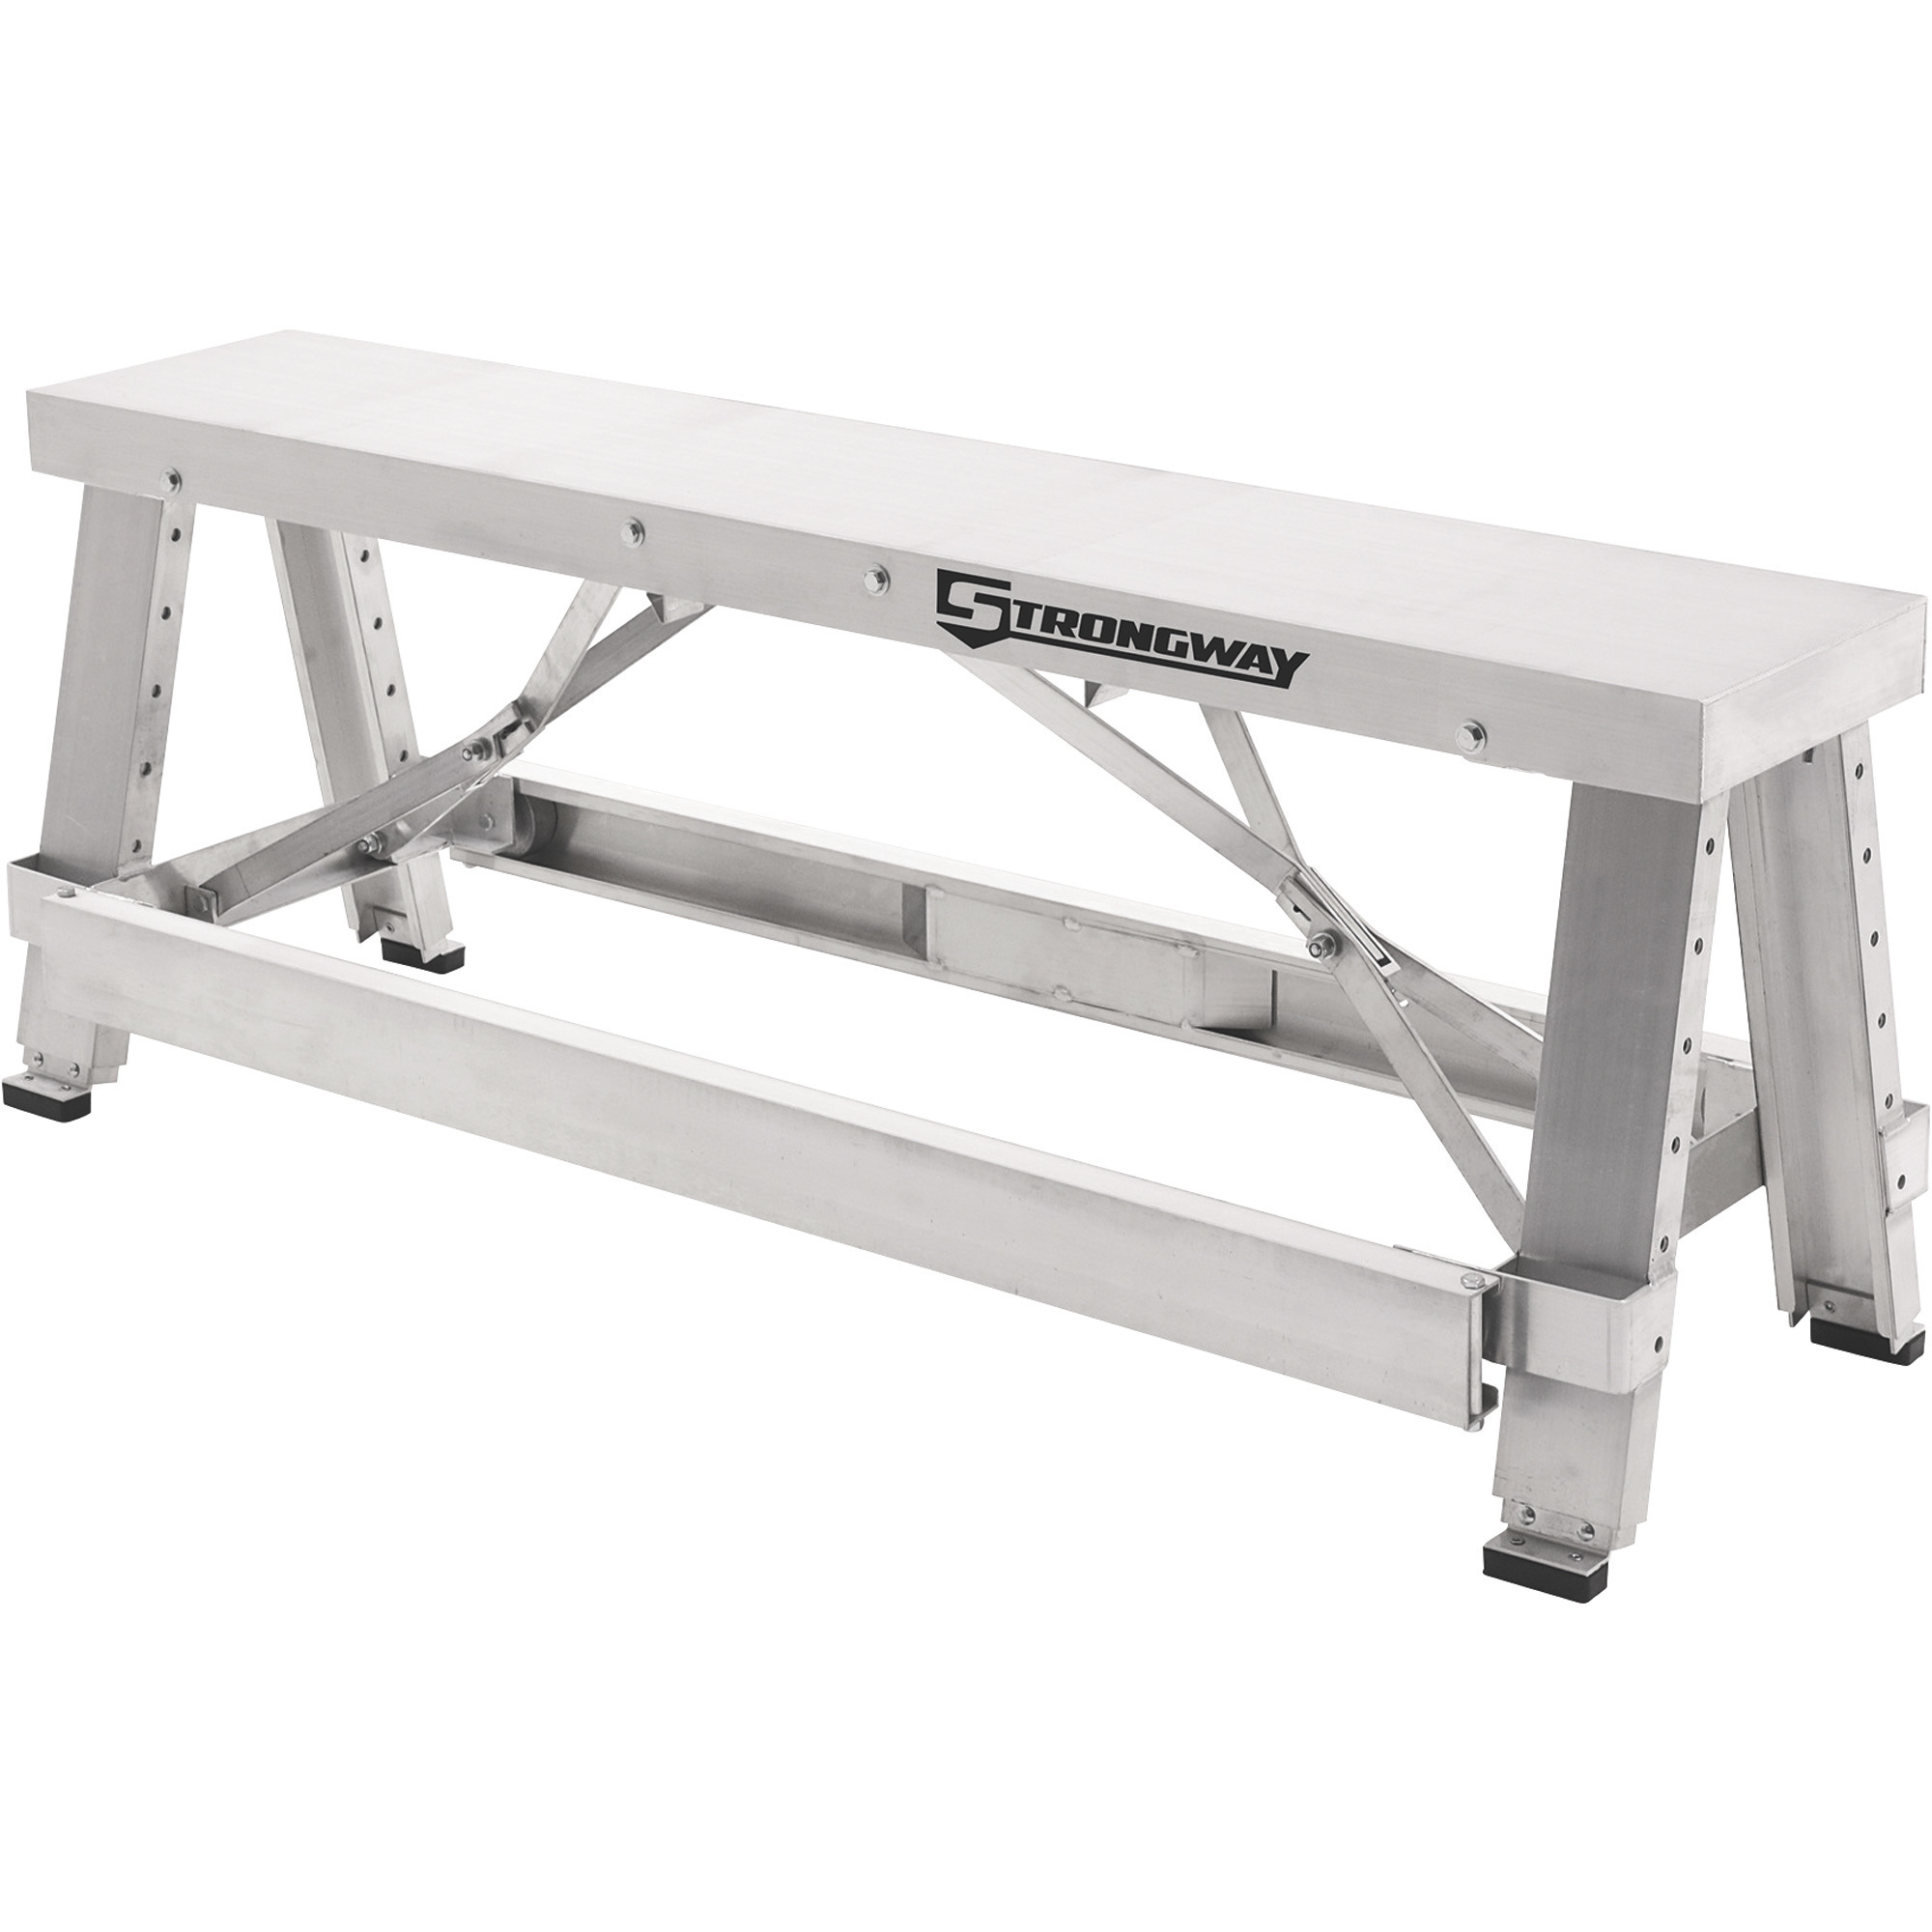 Strongway Adjustable Drywall Bench, 500-Lb. Capacity Top, 250-Lb. Capacity Side Step, 18Inch to 30Inch